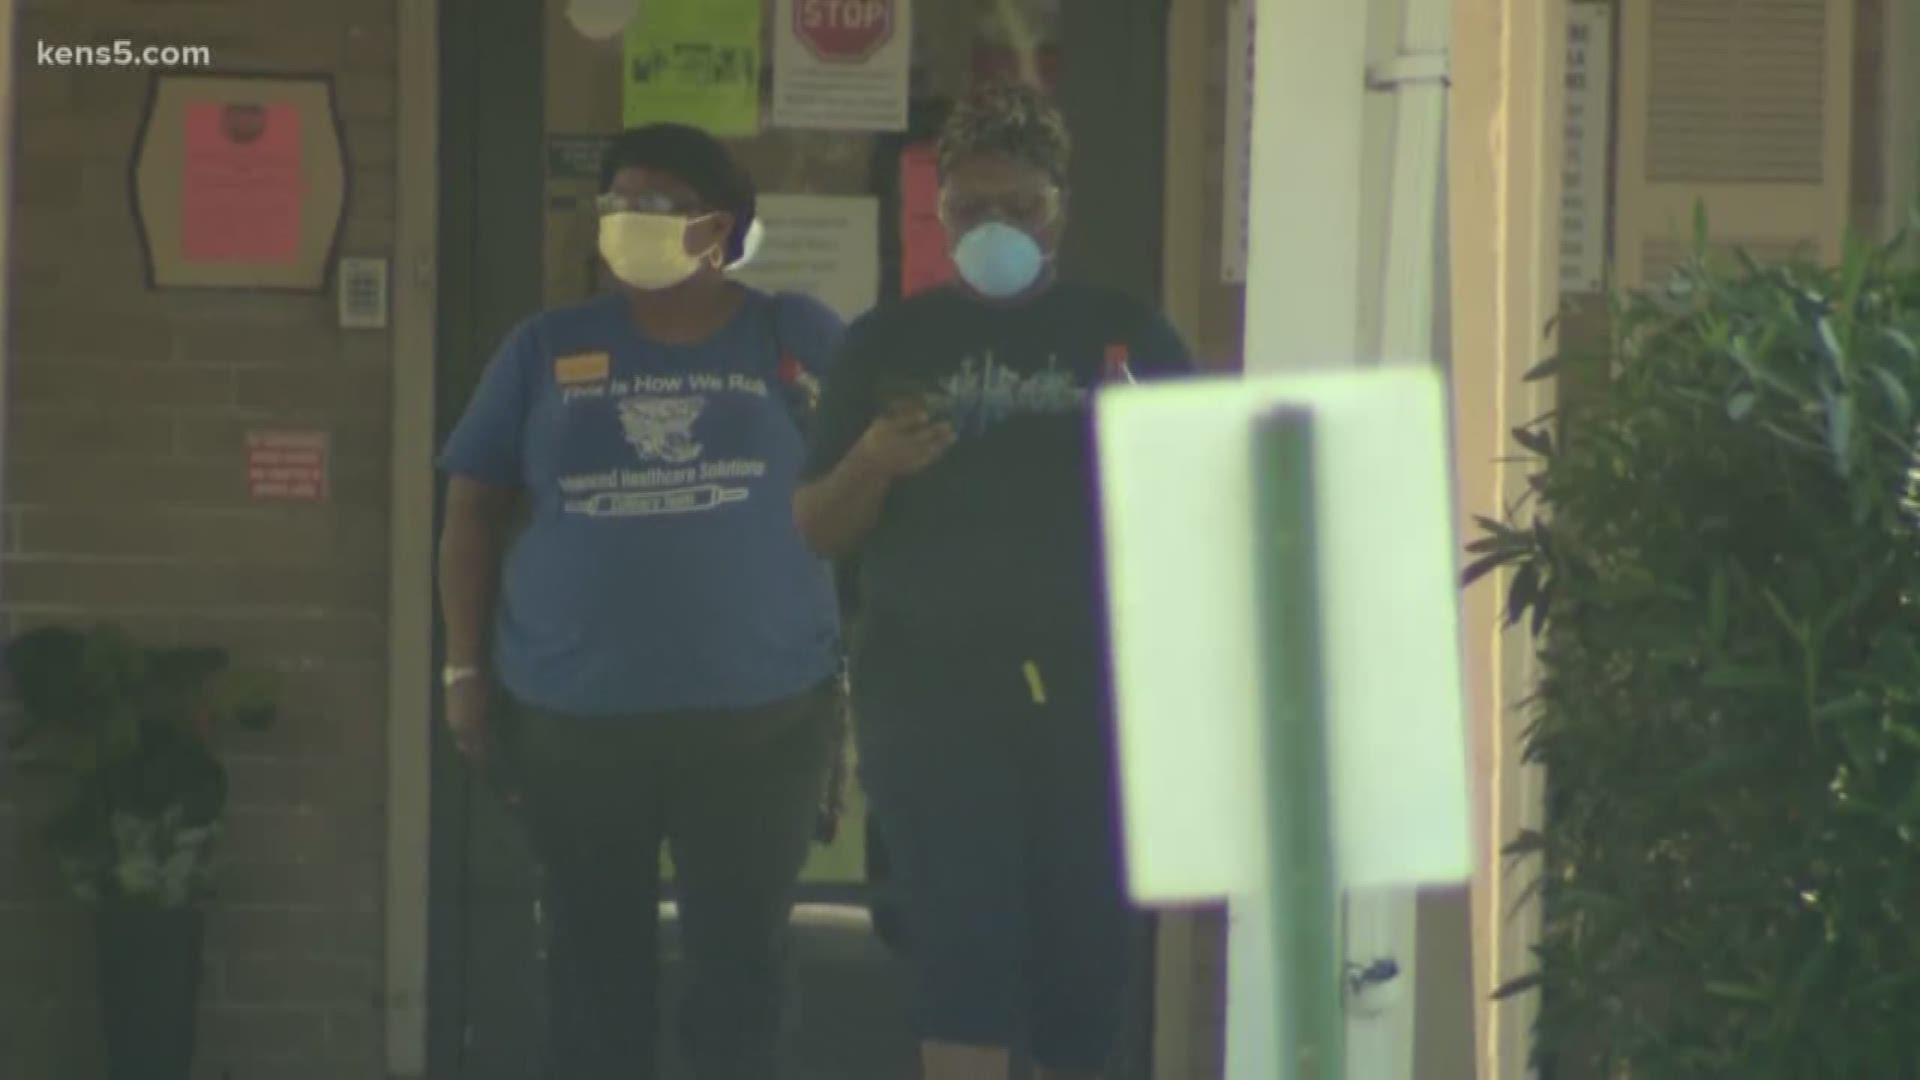 Authorities say local health officials have undertaken more sterilization work at the facility, as well as provided them with more masks and gloves.